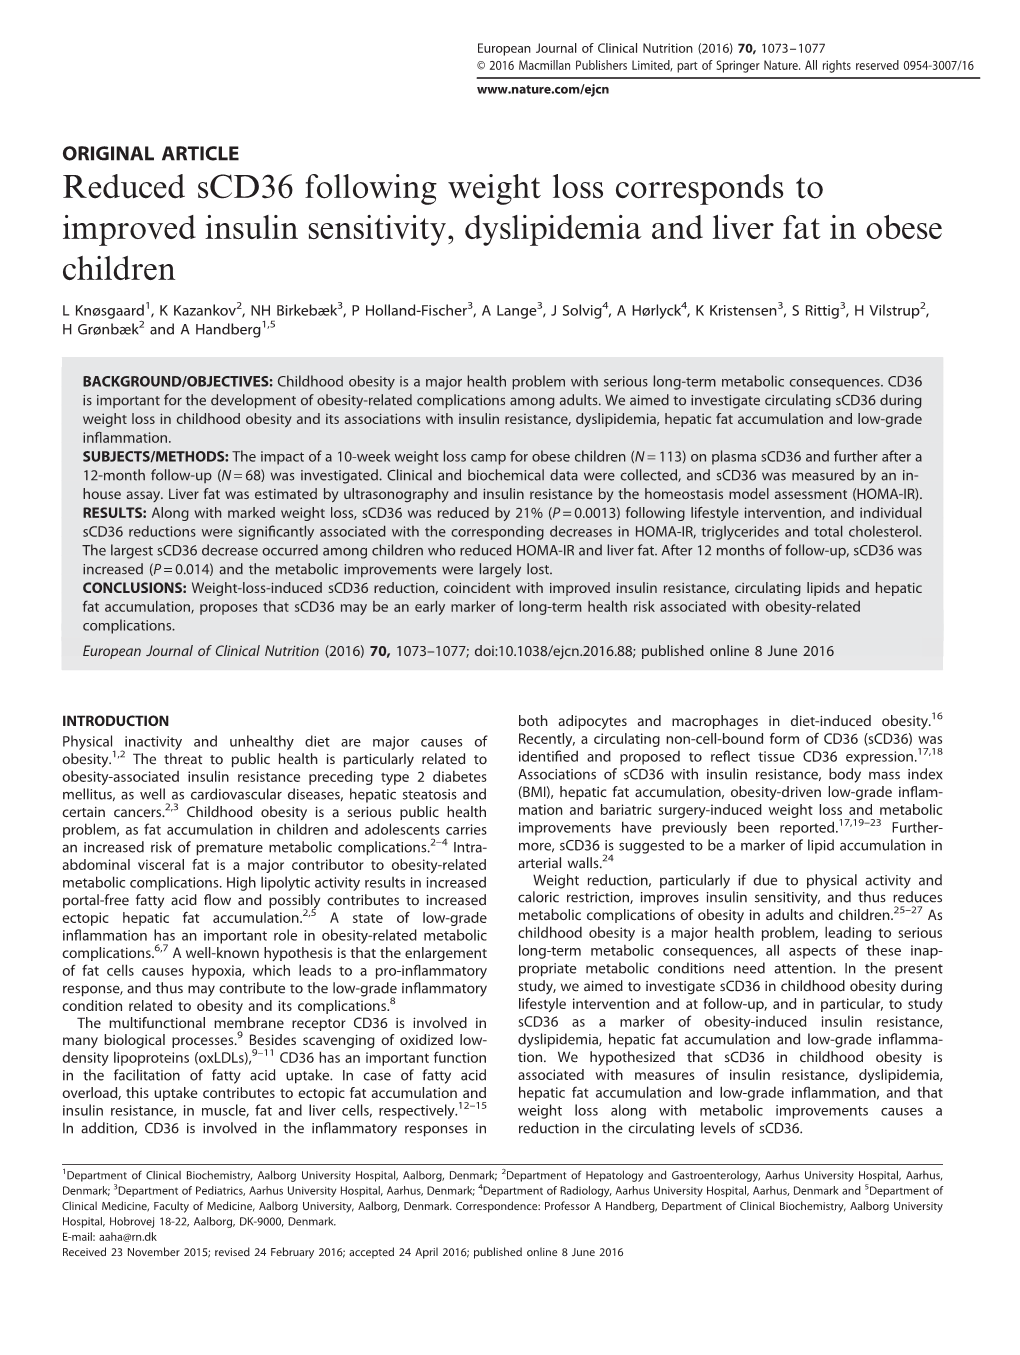 Reduced Scd36 Following Weight Loss Corresponds to Improved Insulin Sensitivity, Dyslipidemia and Liver Fat in Obese Children